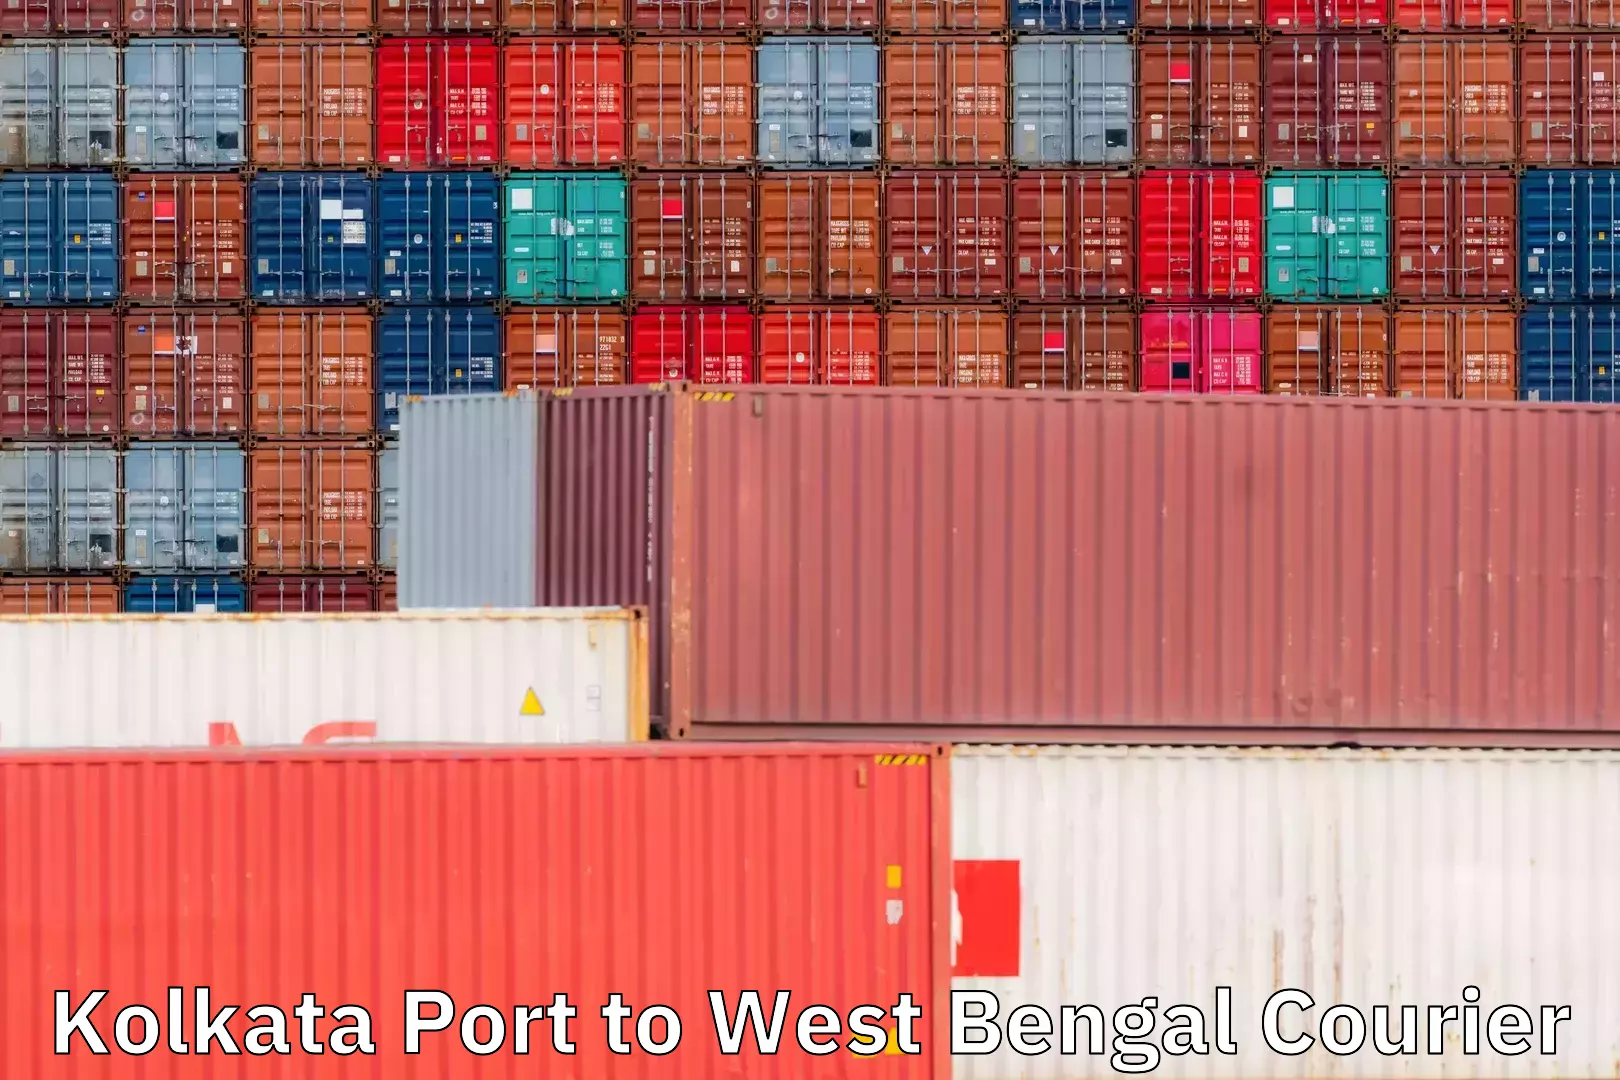 Flexible delivery scheduling Kolkata Port to Asansol